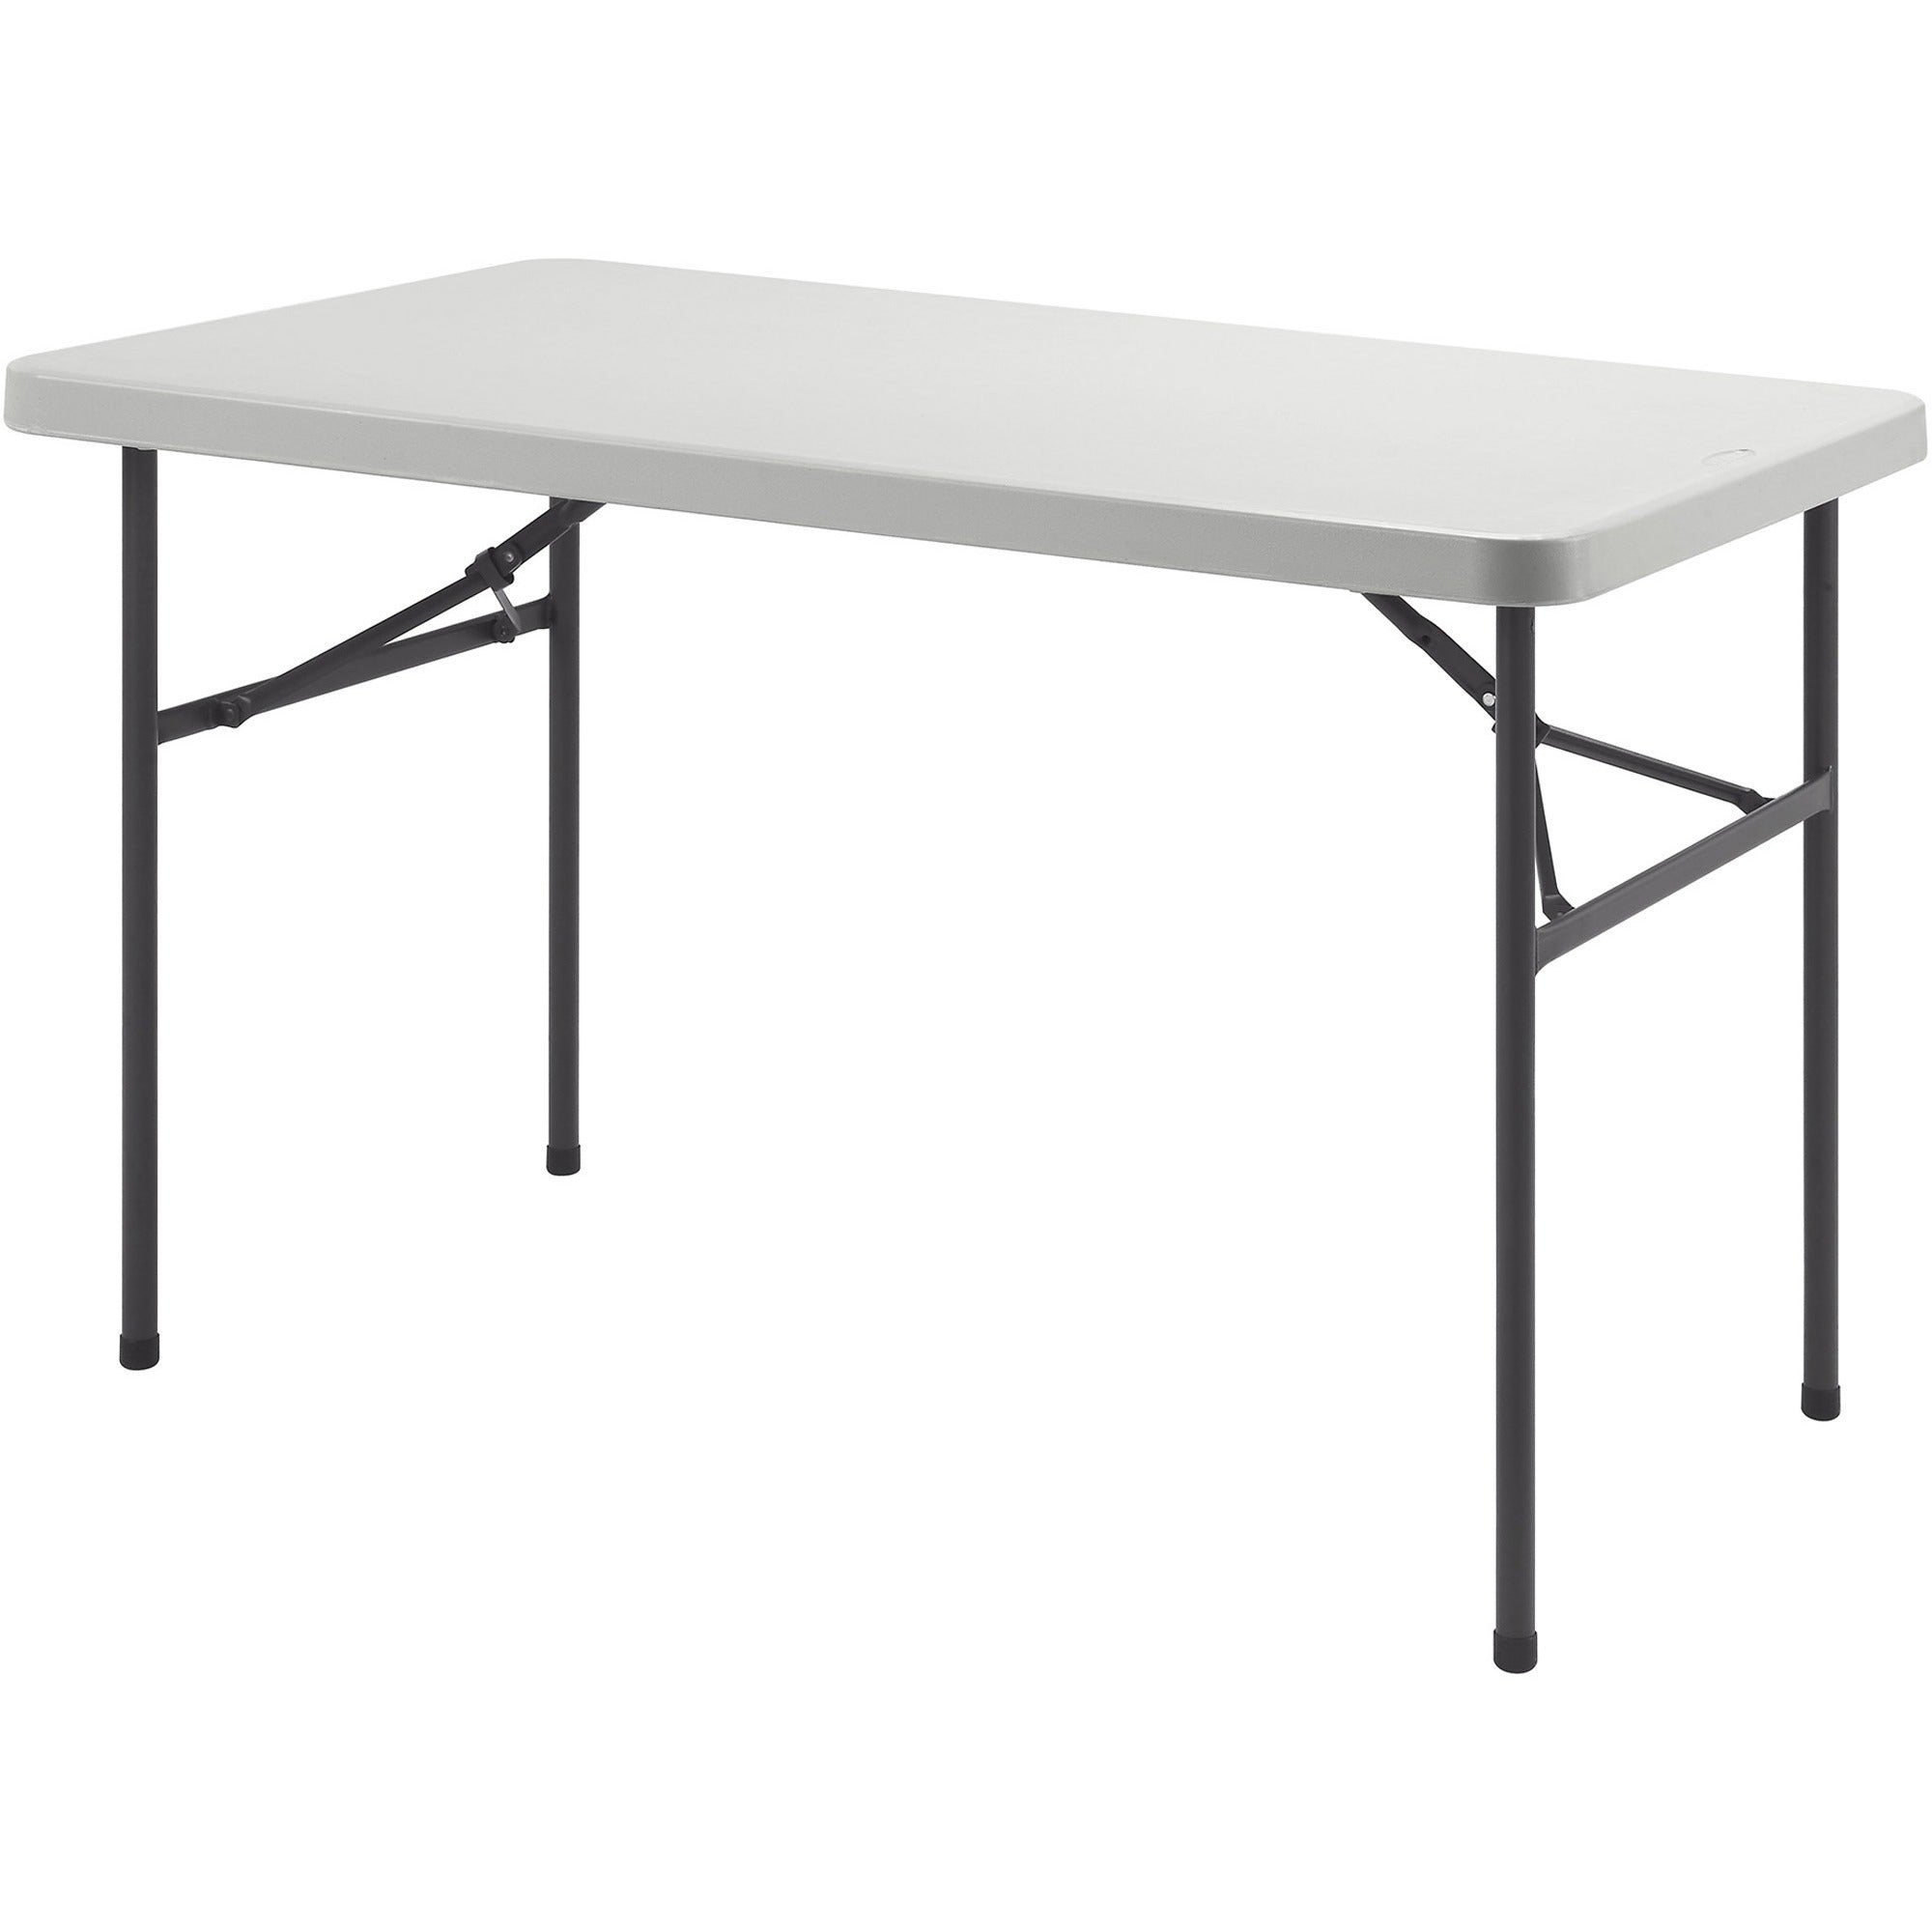 lorell-ultra-lite-banquet-table-for-table-toplight-gray-rectangle-top-dark-gray-base-450-lb-capacity-x-48-table-top-width-x-30-table-top-depth-x-2-table-top-thickness-29-height-gray-1-each_llr66657 - 1